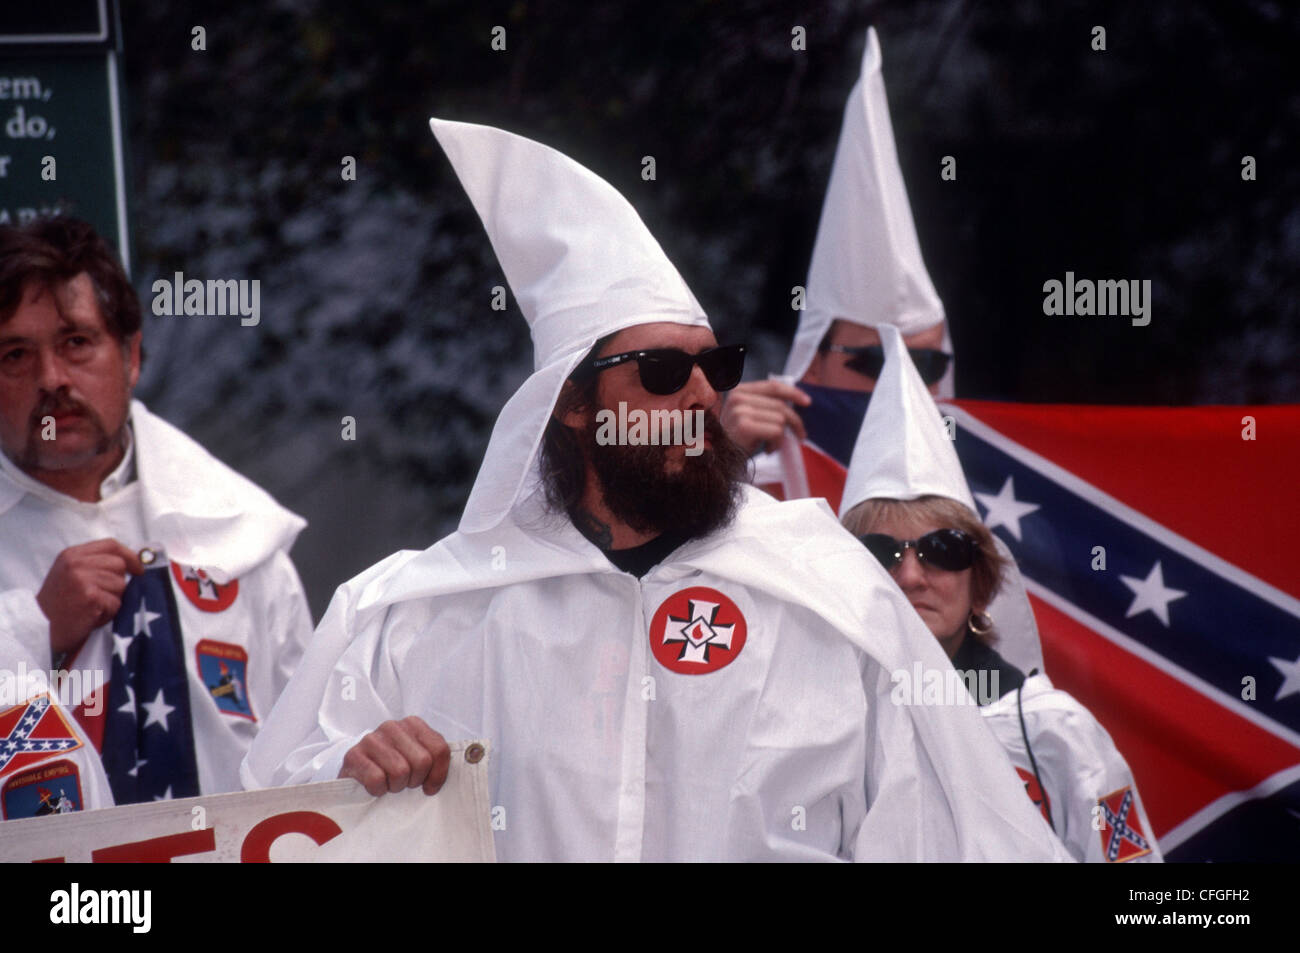 Members of the Ku Klux Klan at a rally held in New York City Stock Photo